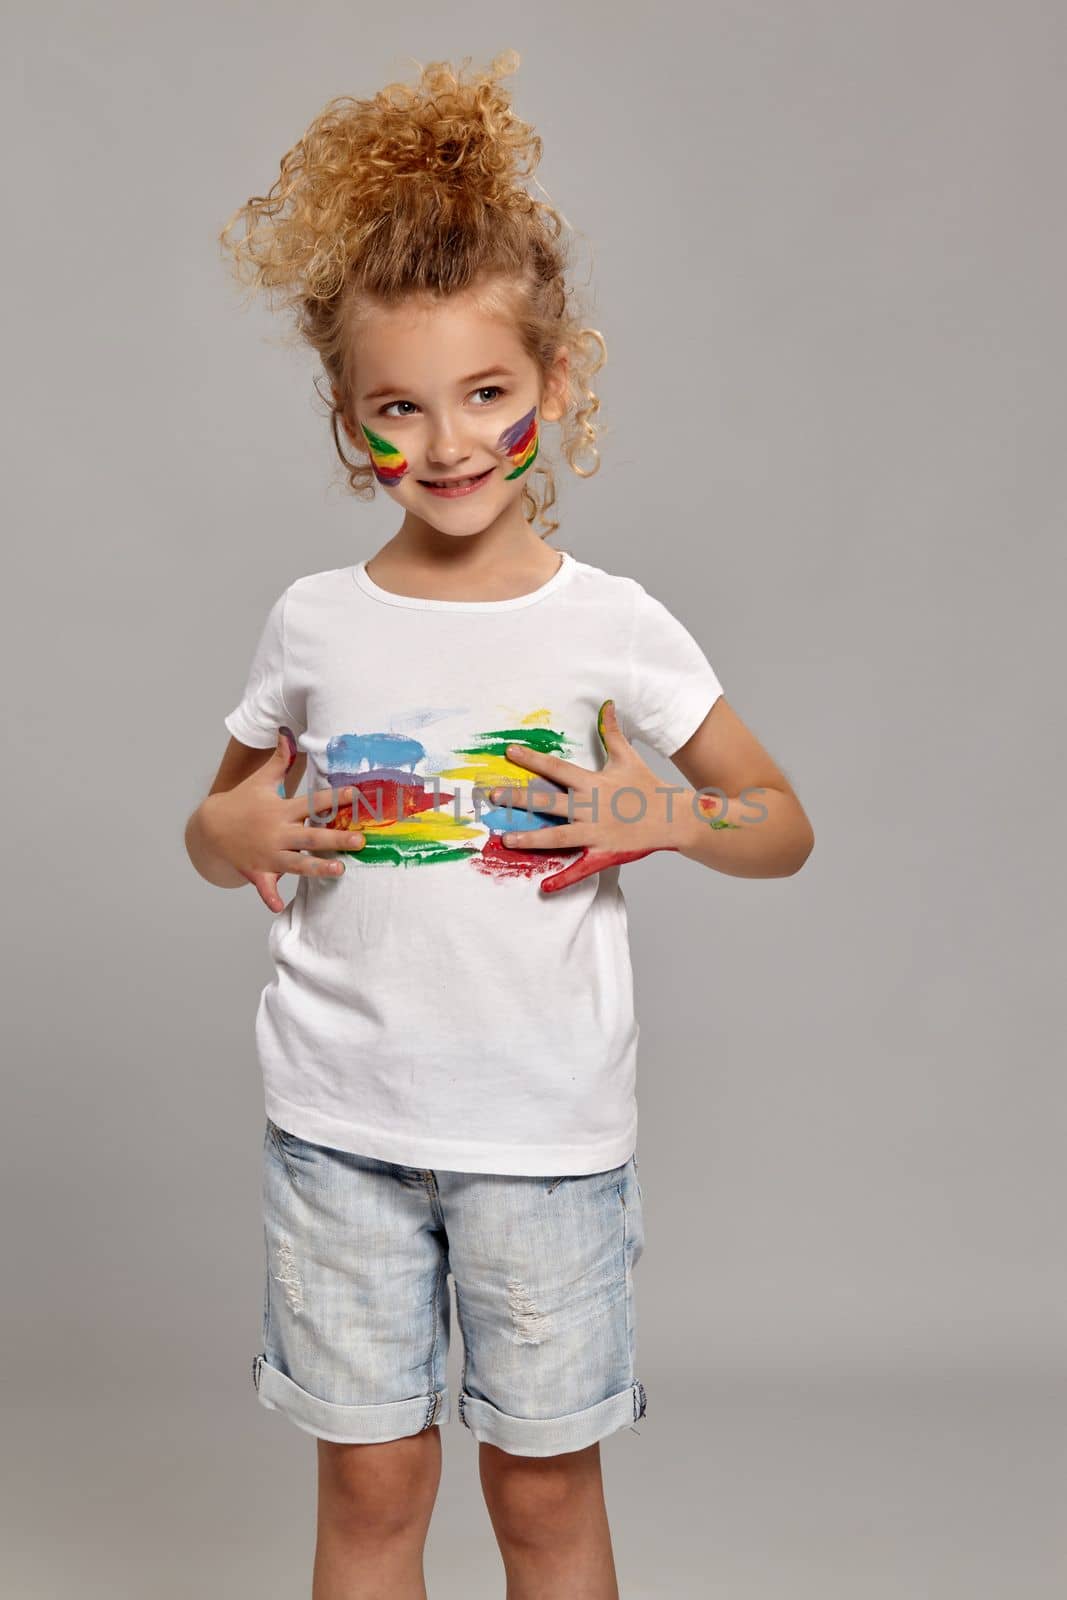 Wonderful child having a brush in her lovely haircut, wearing in a white t-shirt. She is smearing her t-shirt, smiling and looking away, on a gray background.